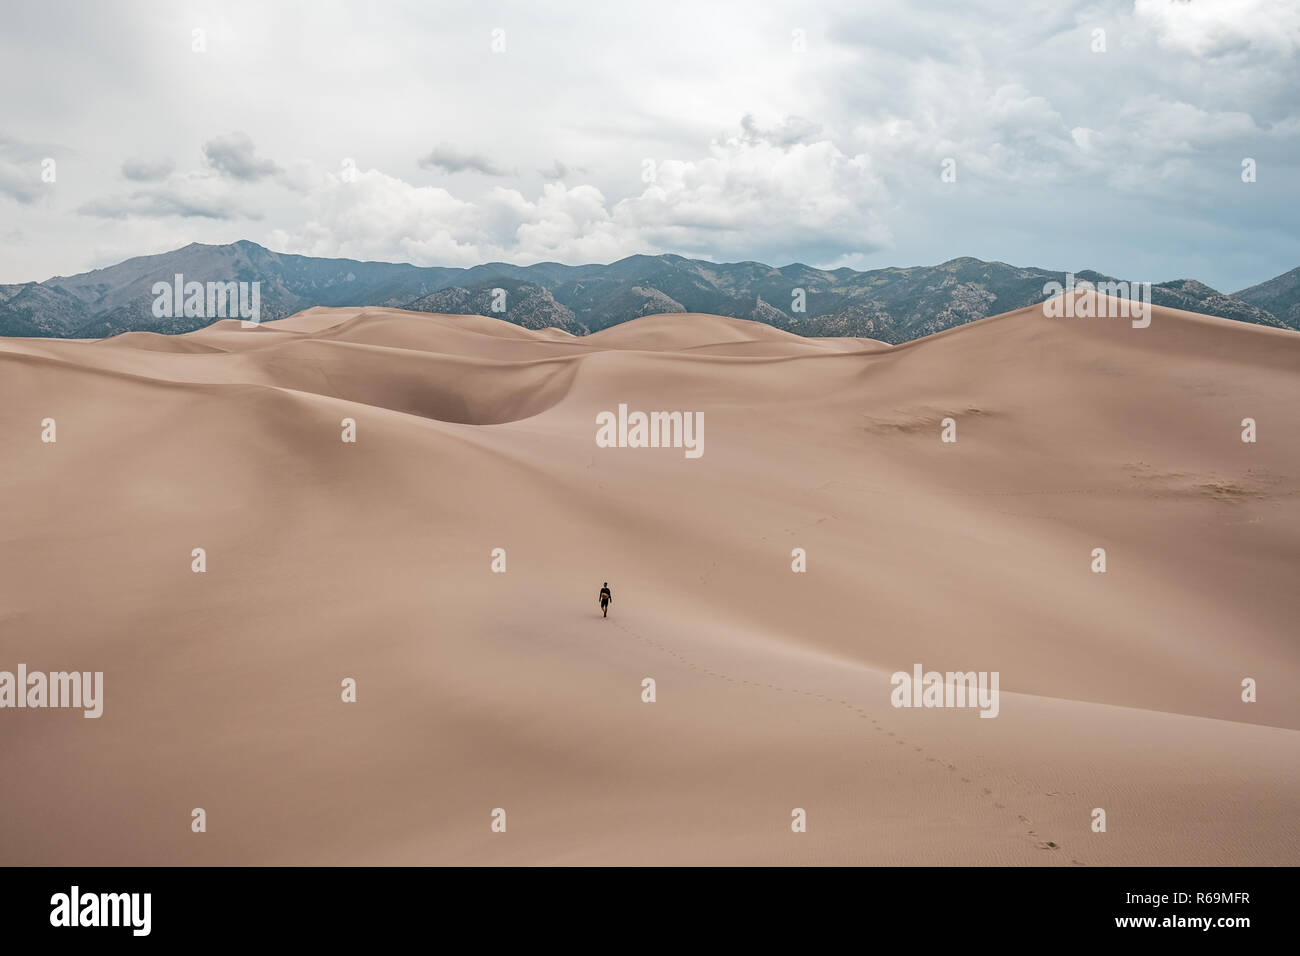 A man walking the giant sand dunes during stormy weather at Great Sand Dunes National Park in Colorado, USA Stock Photo